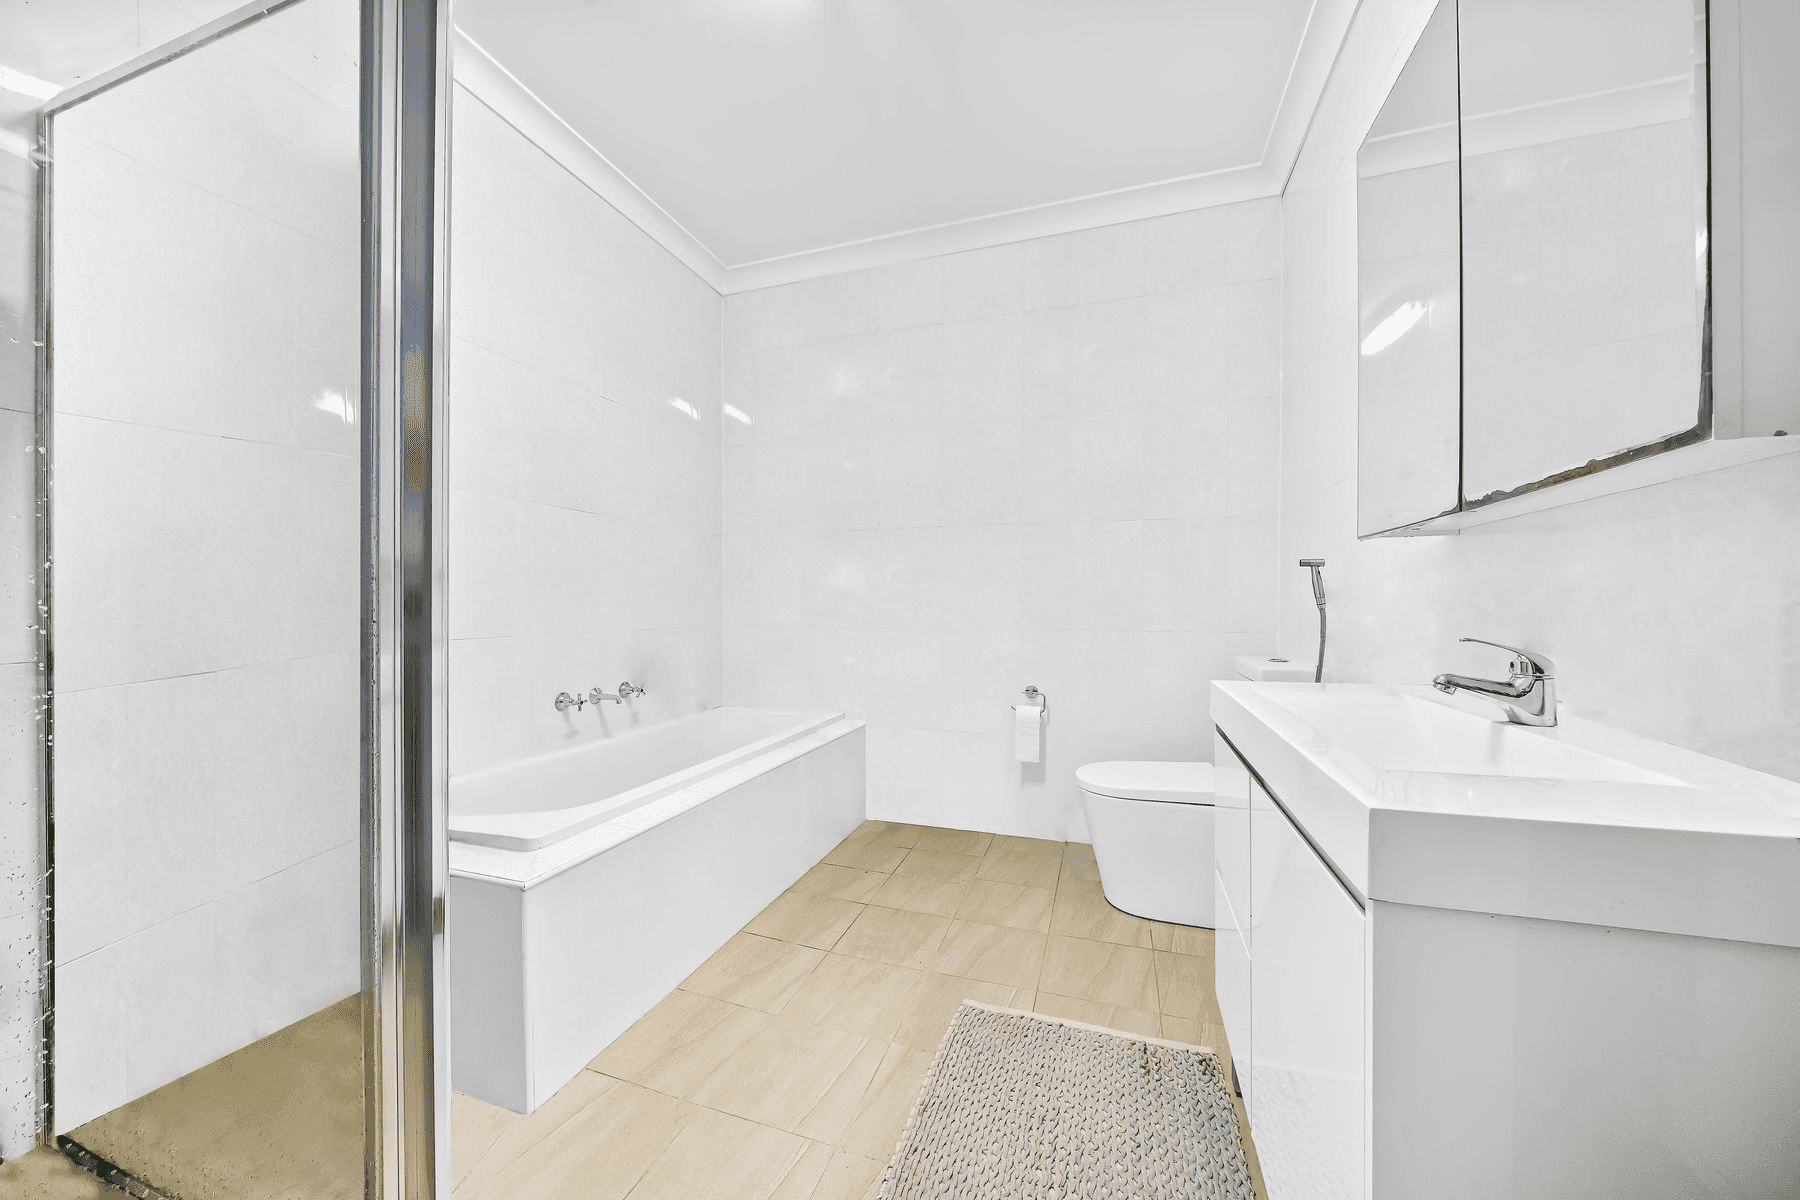 2/45 Anderson Avenue, MOUNT PRITCHARD, NSW 2170